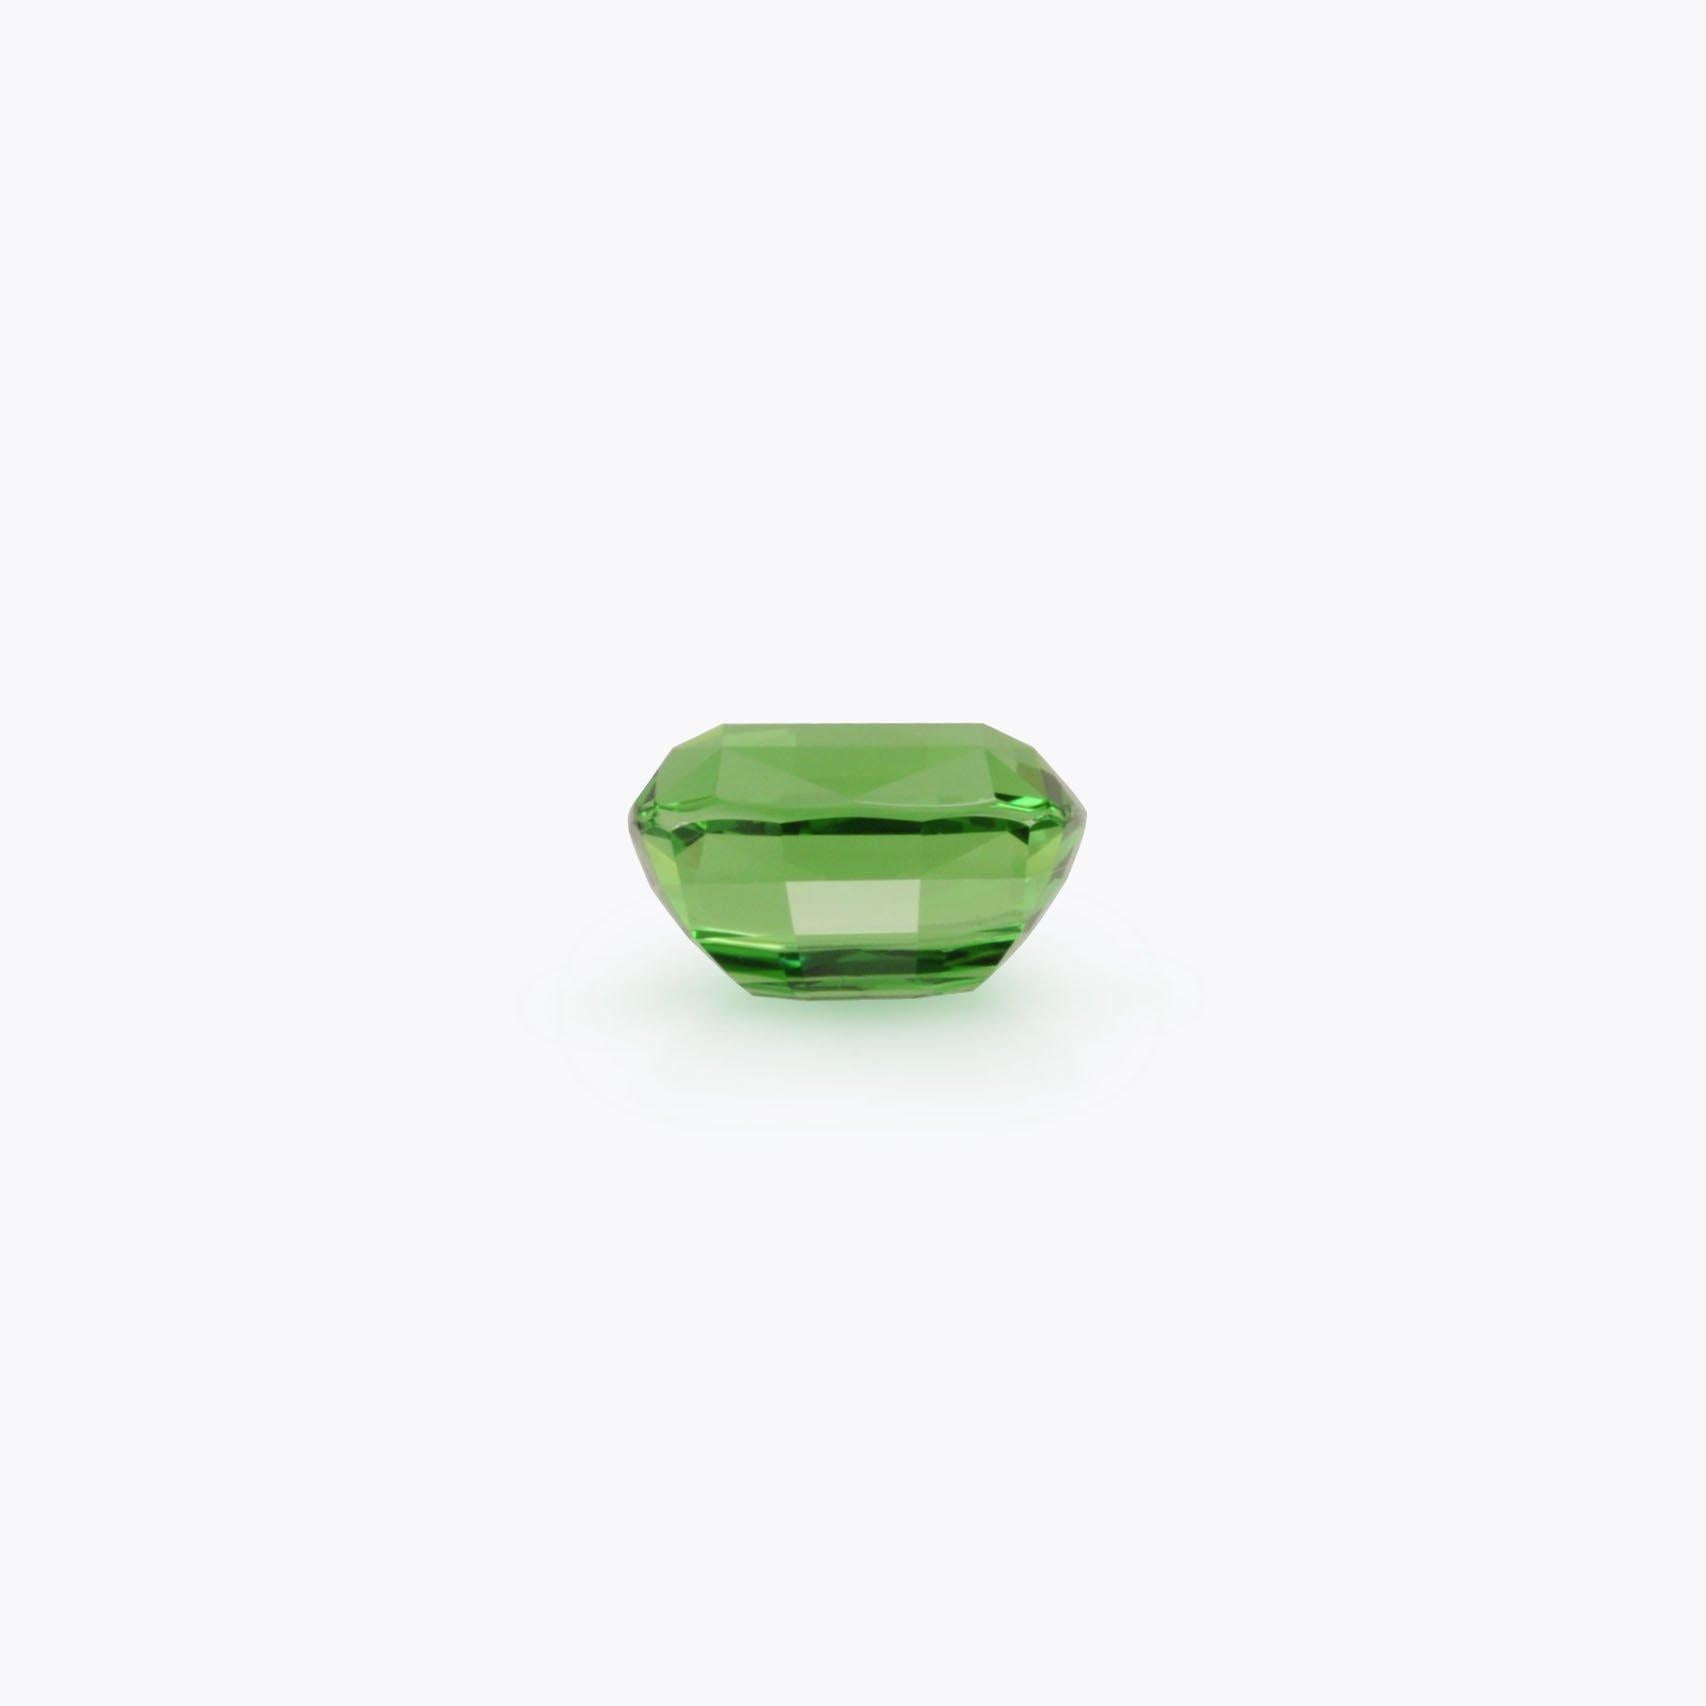 Vibrant 4.10 carat Tsavorite Garnet cushion cut gem, offered loose to a classy lady or gentleman.
Dimensions: 9.60 x 7.80 x 5.80 mm.
Returns are accepted and paid by us within 7 days of delivery.
We offer supreme custom jewelry work upon request.